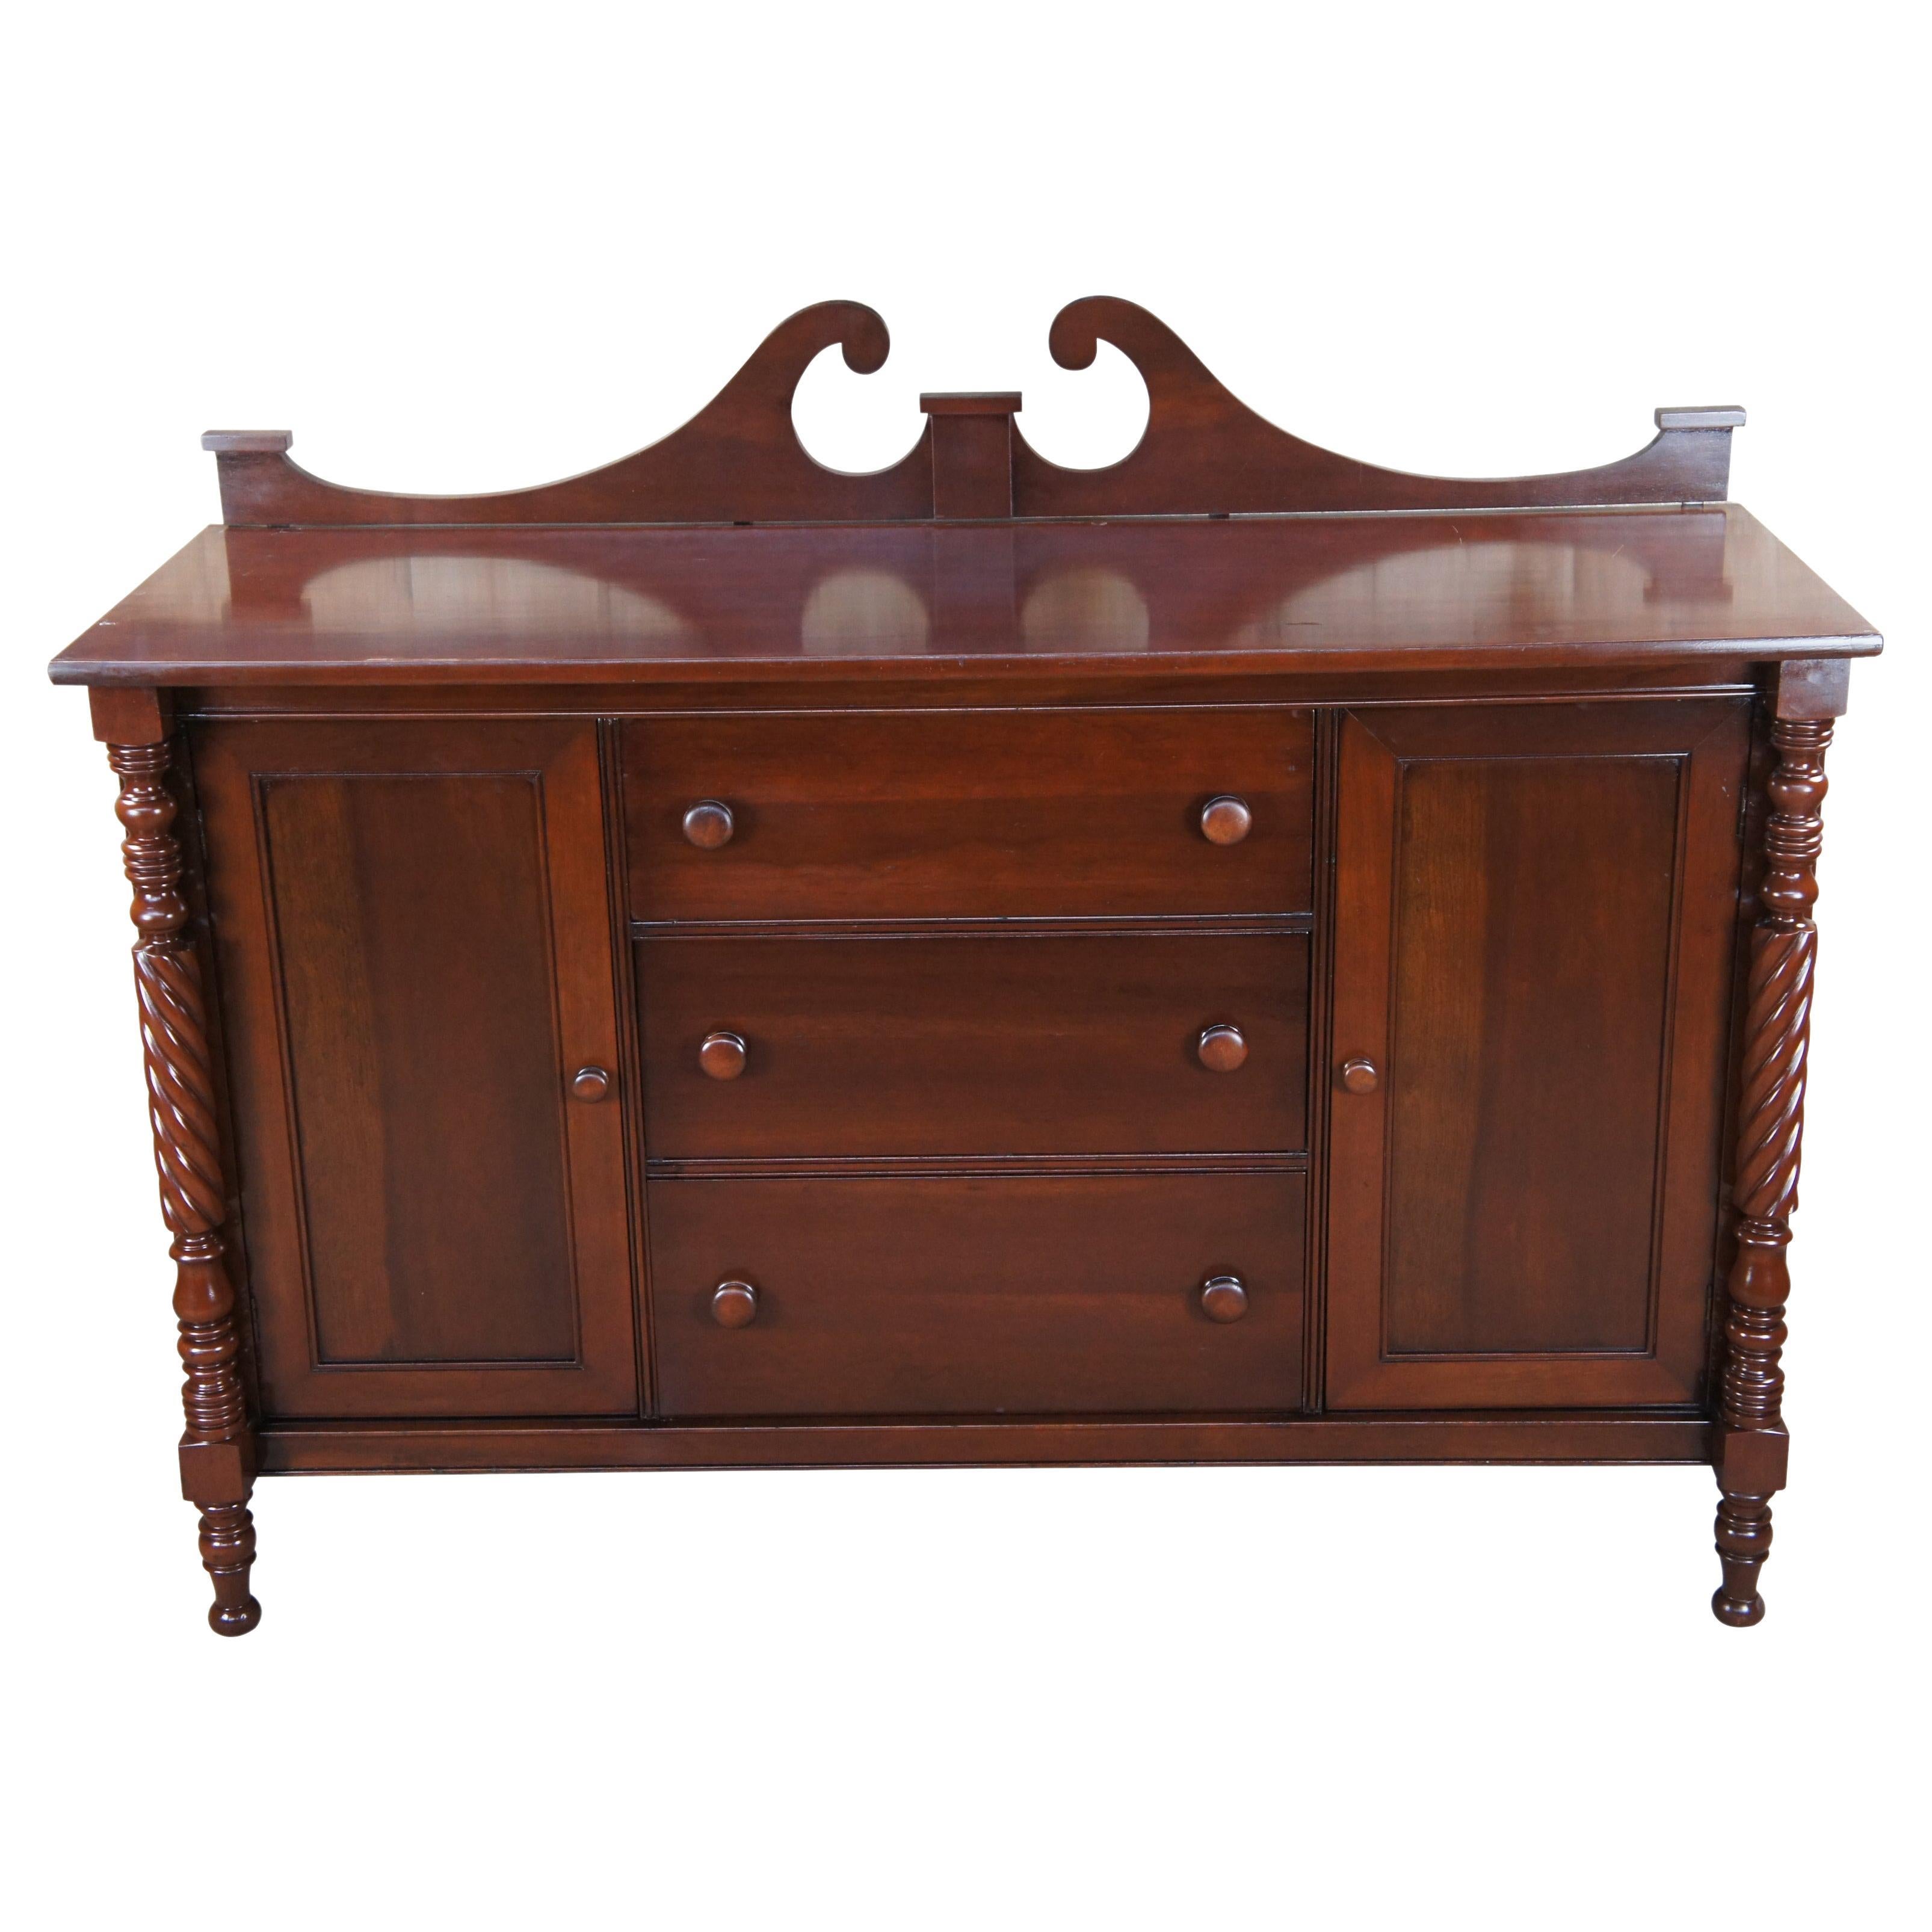 Antique Styled By Park American Empire Cherry Buffet Sideboard Credenza 60"